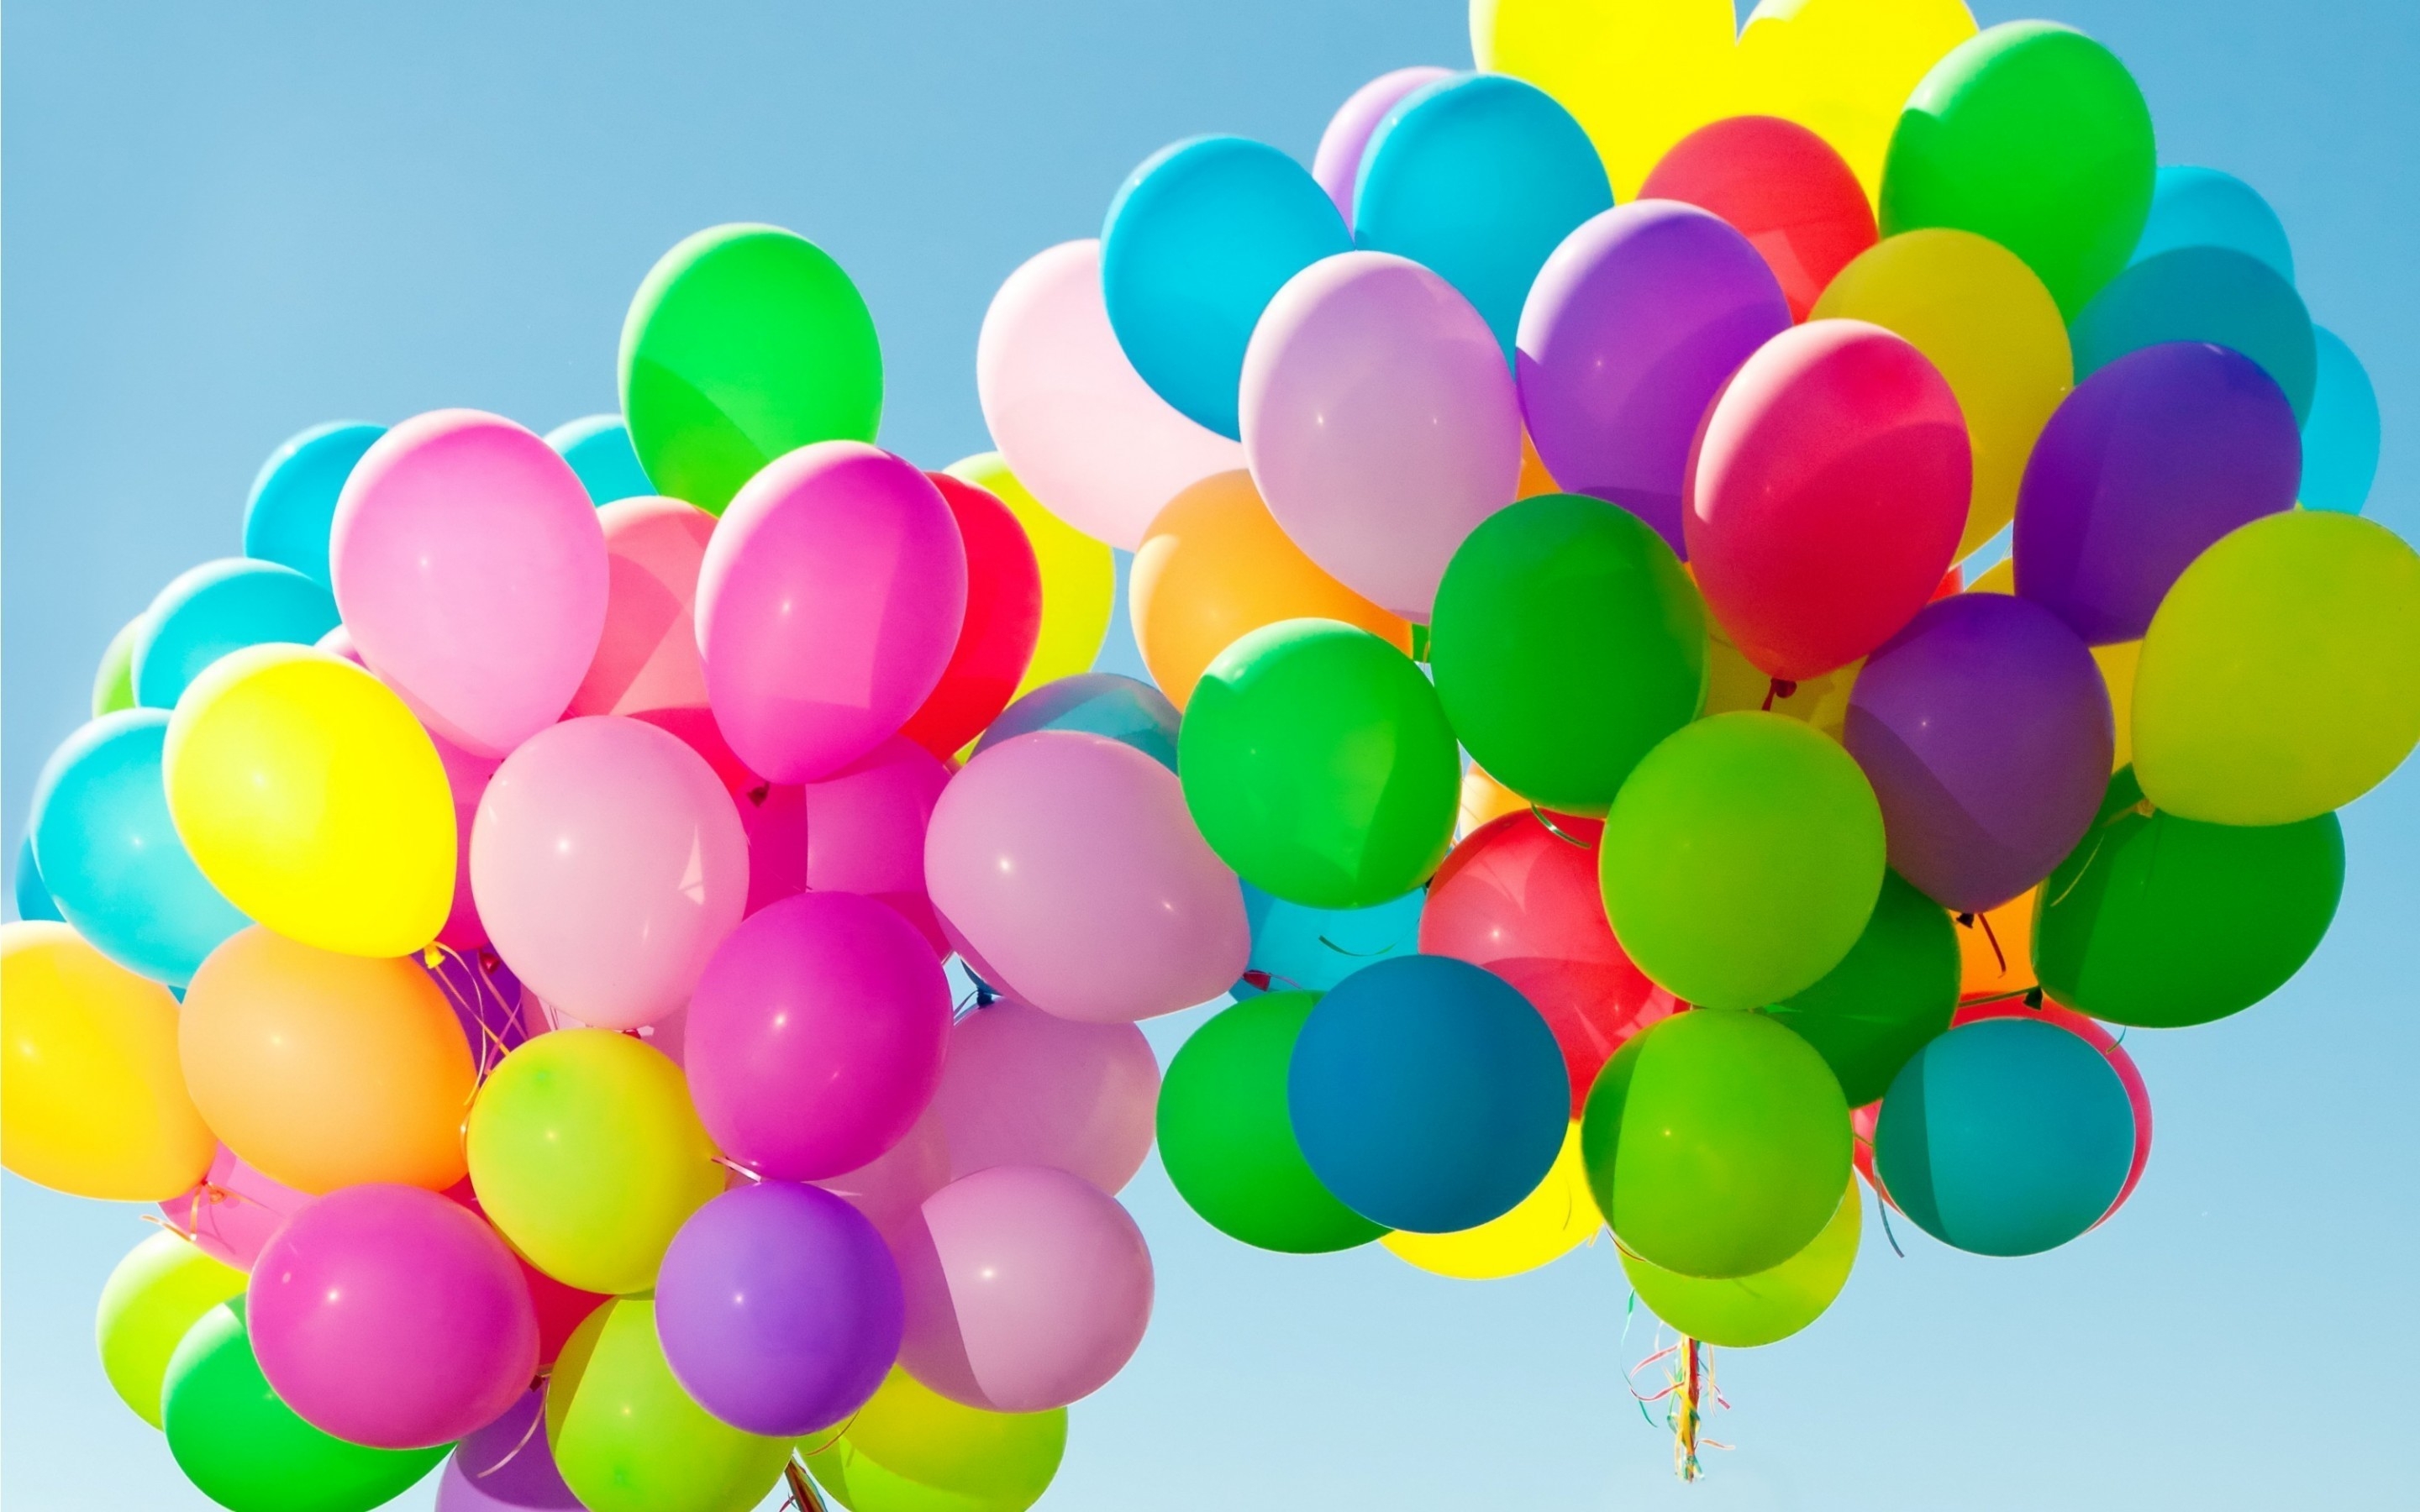 Colorful Balloons in the Sky for 2880 x 1800 Retina Display resolution